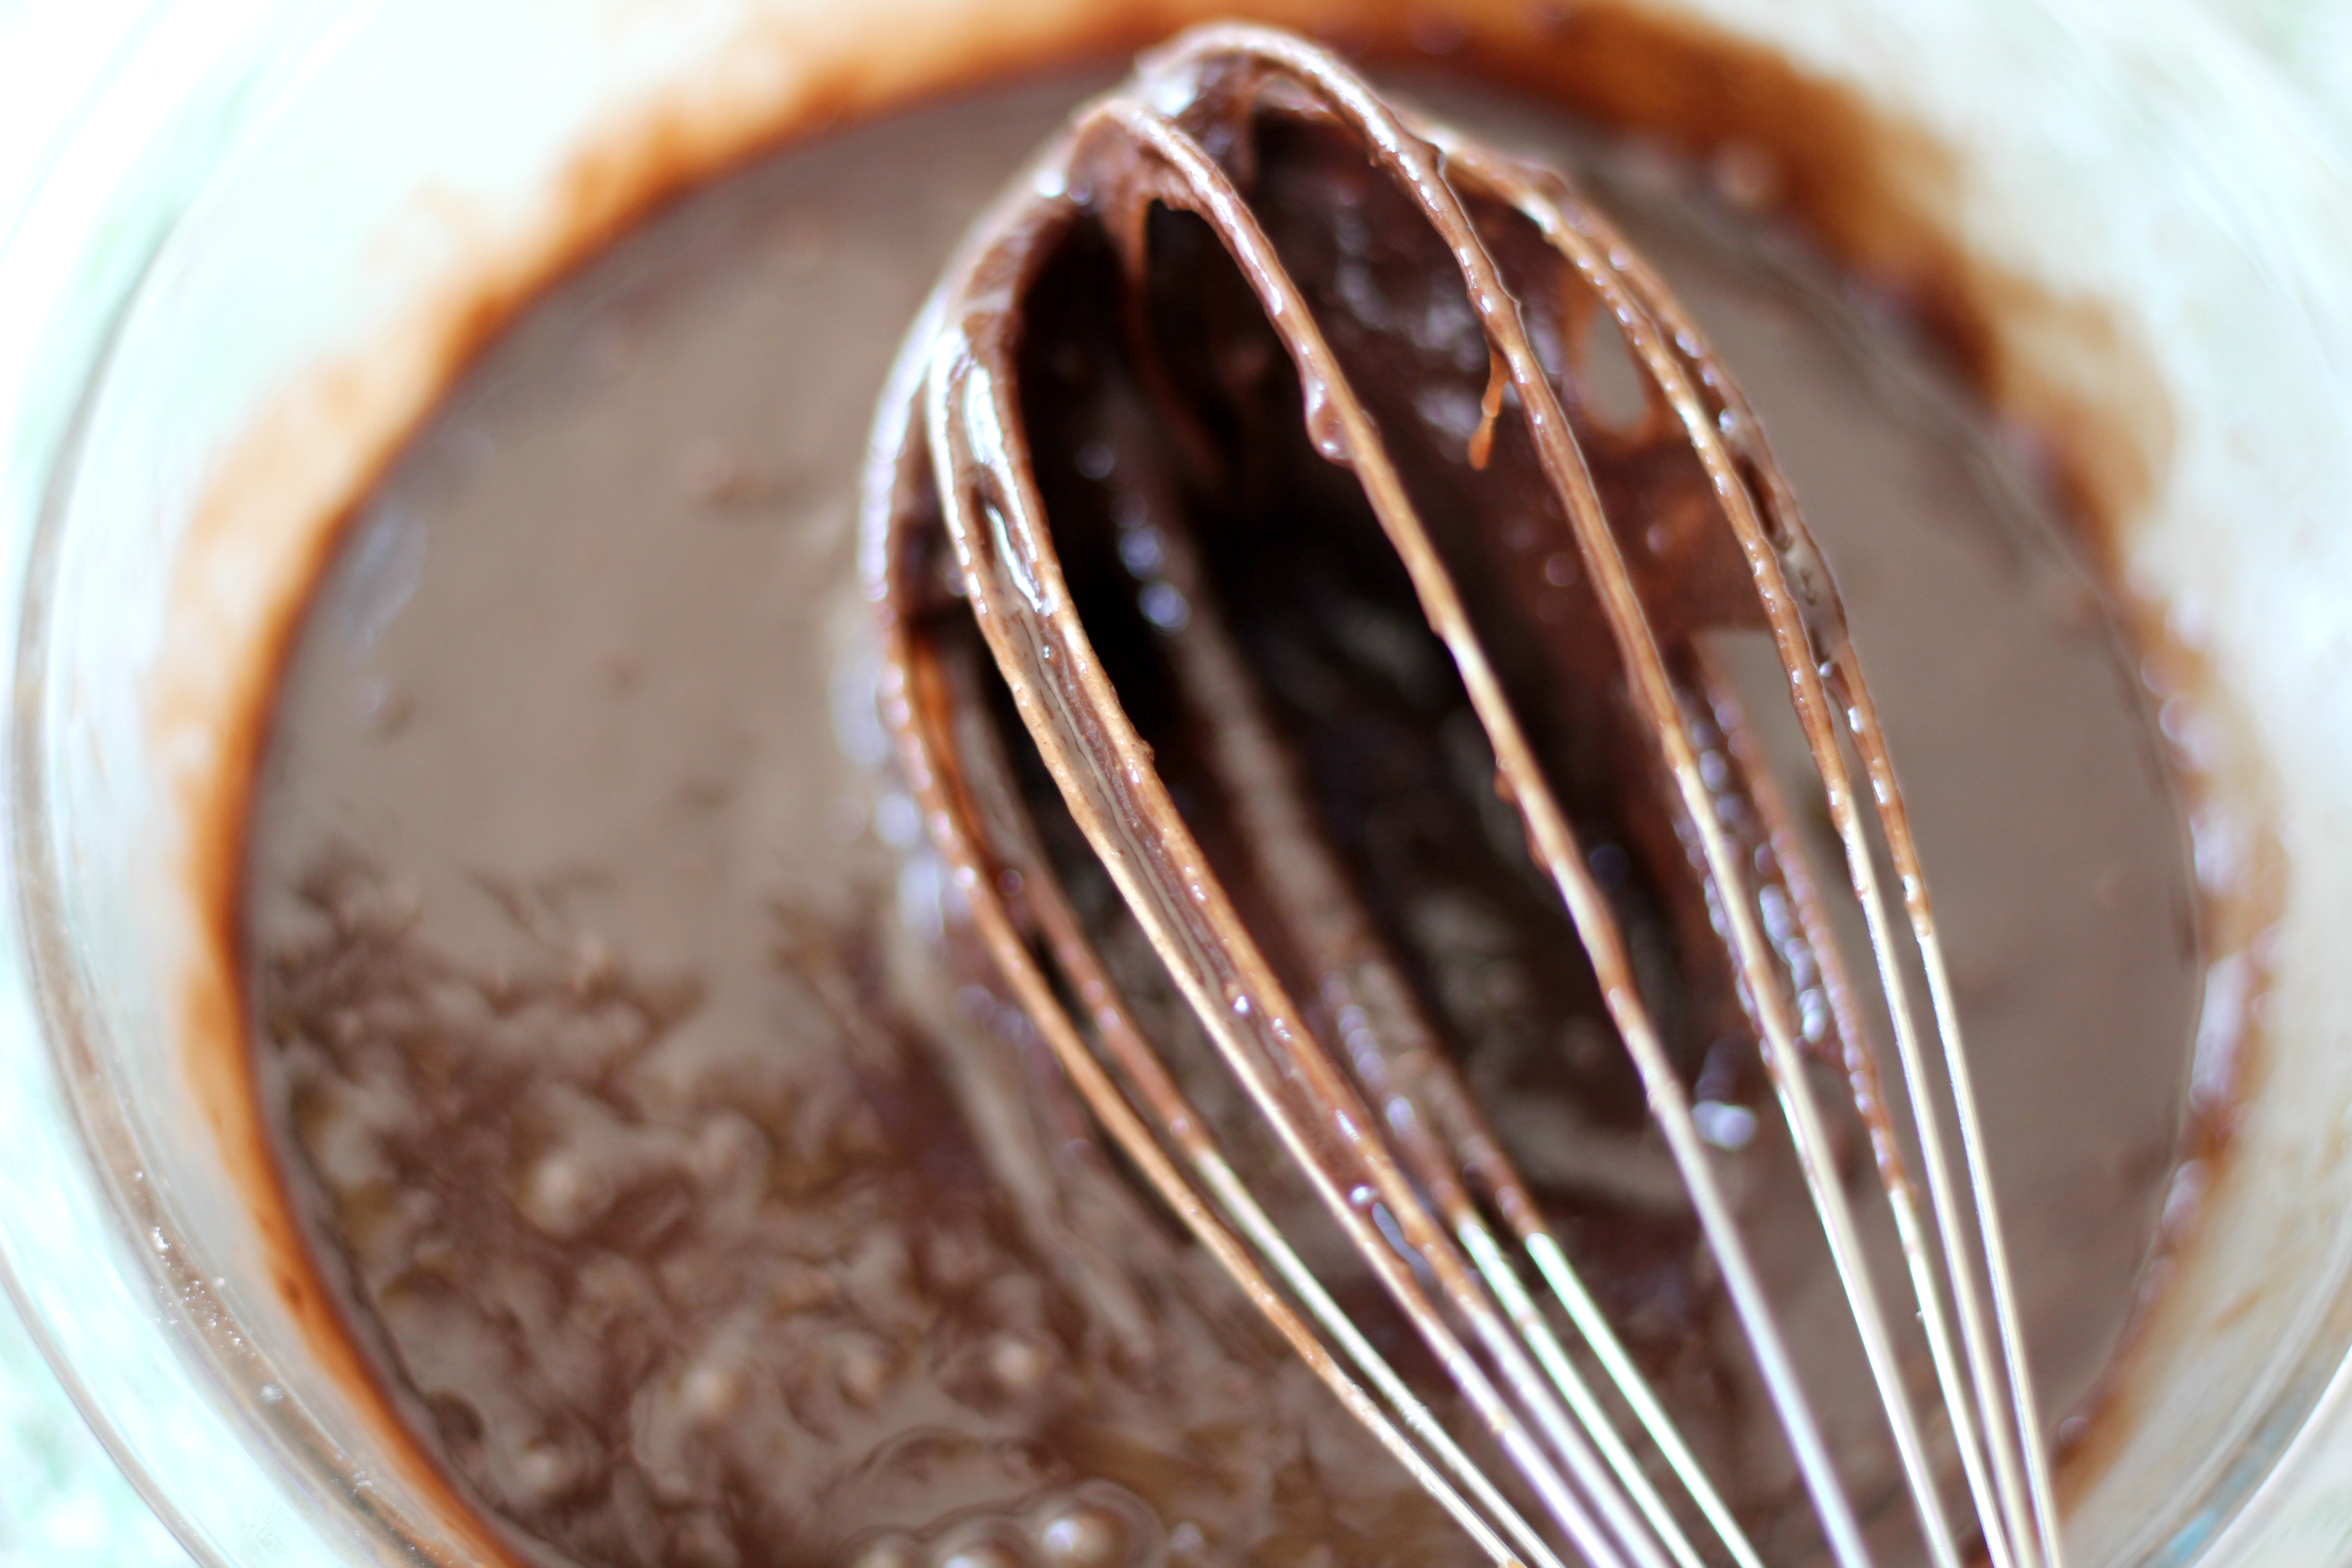 Sometimes the best part of making brownies is getting to taste the batter while they're baking! 